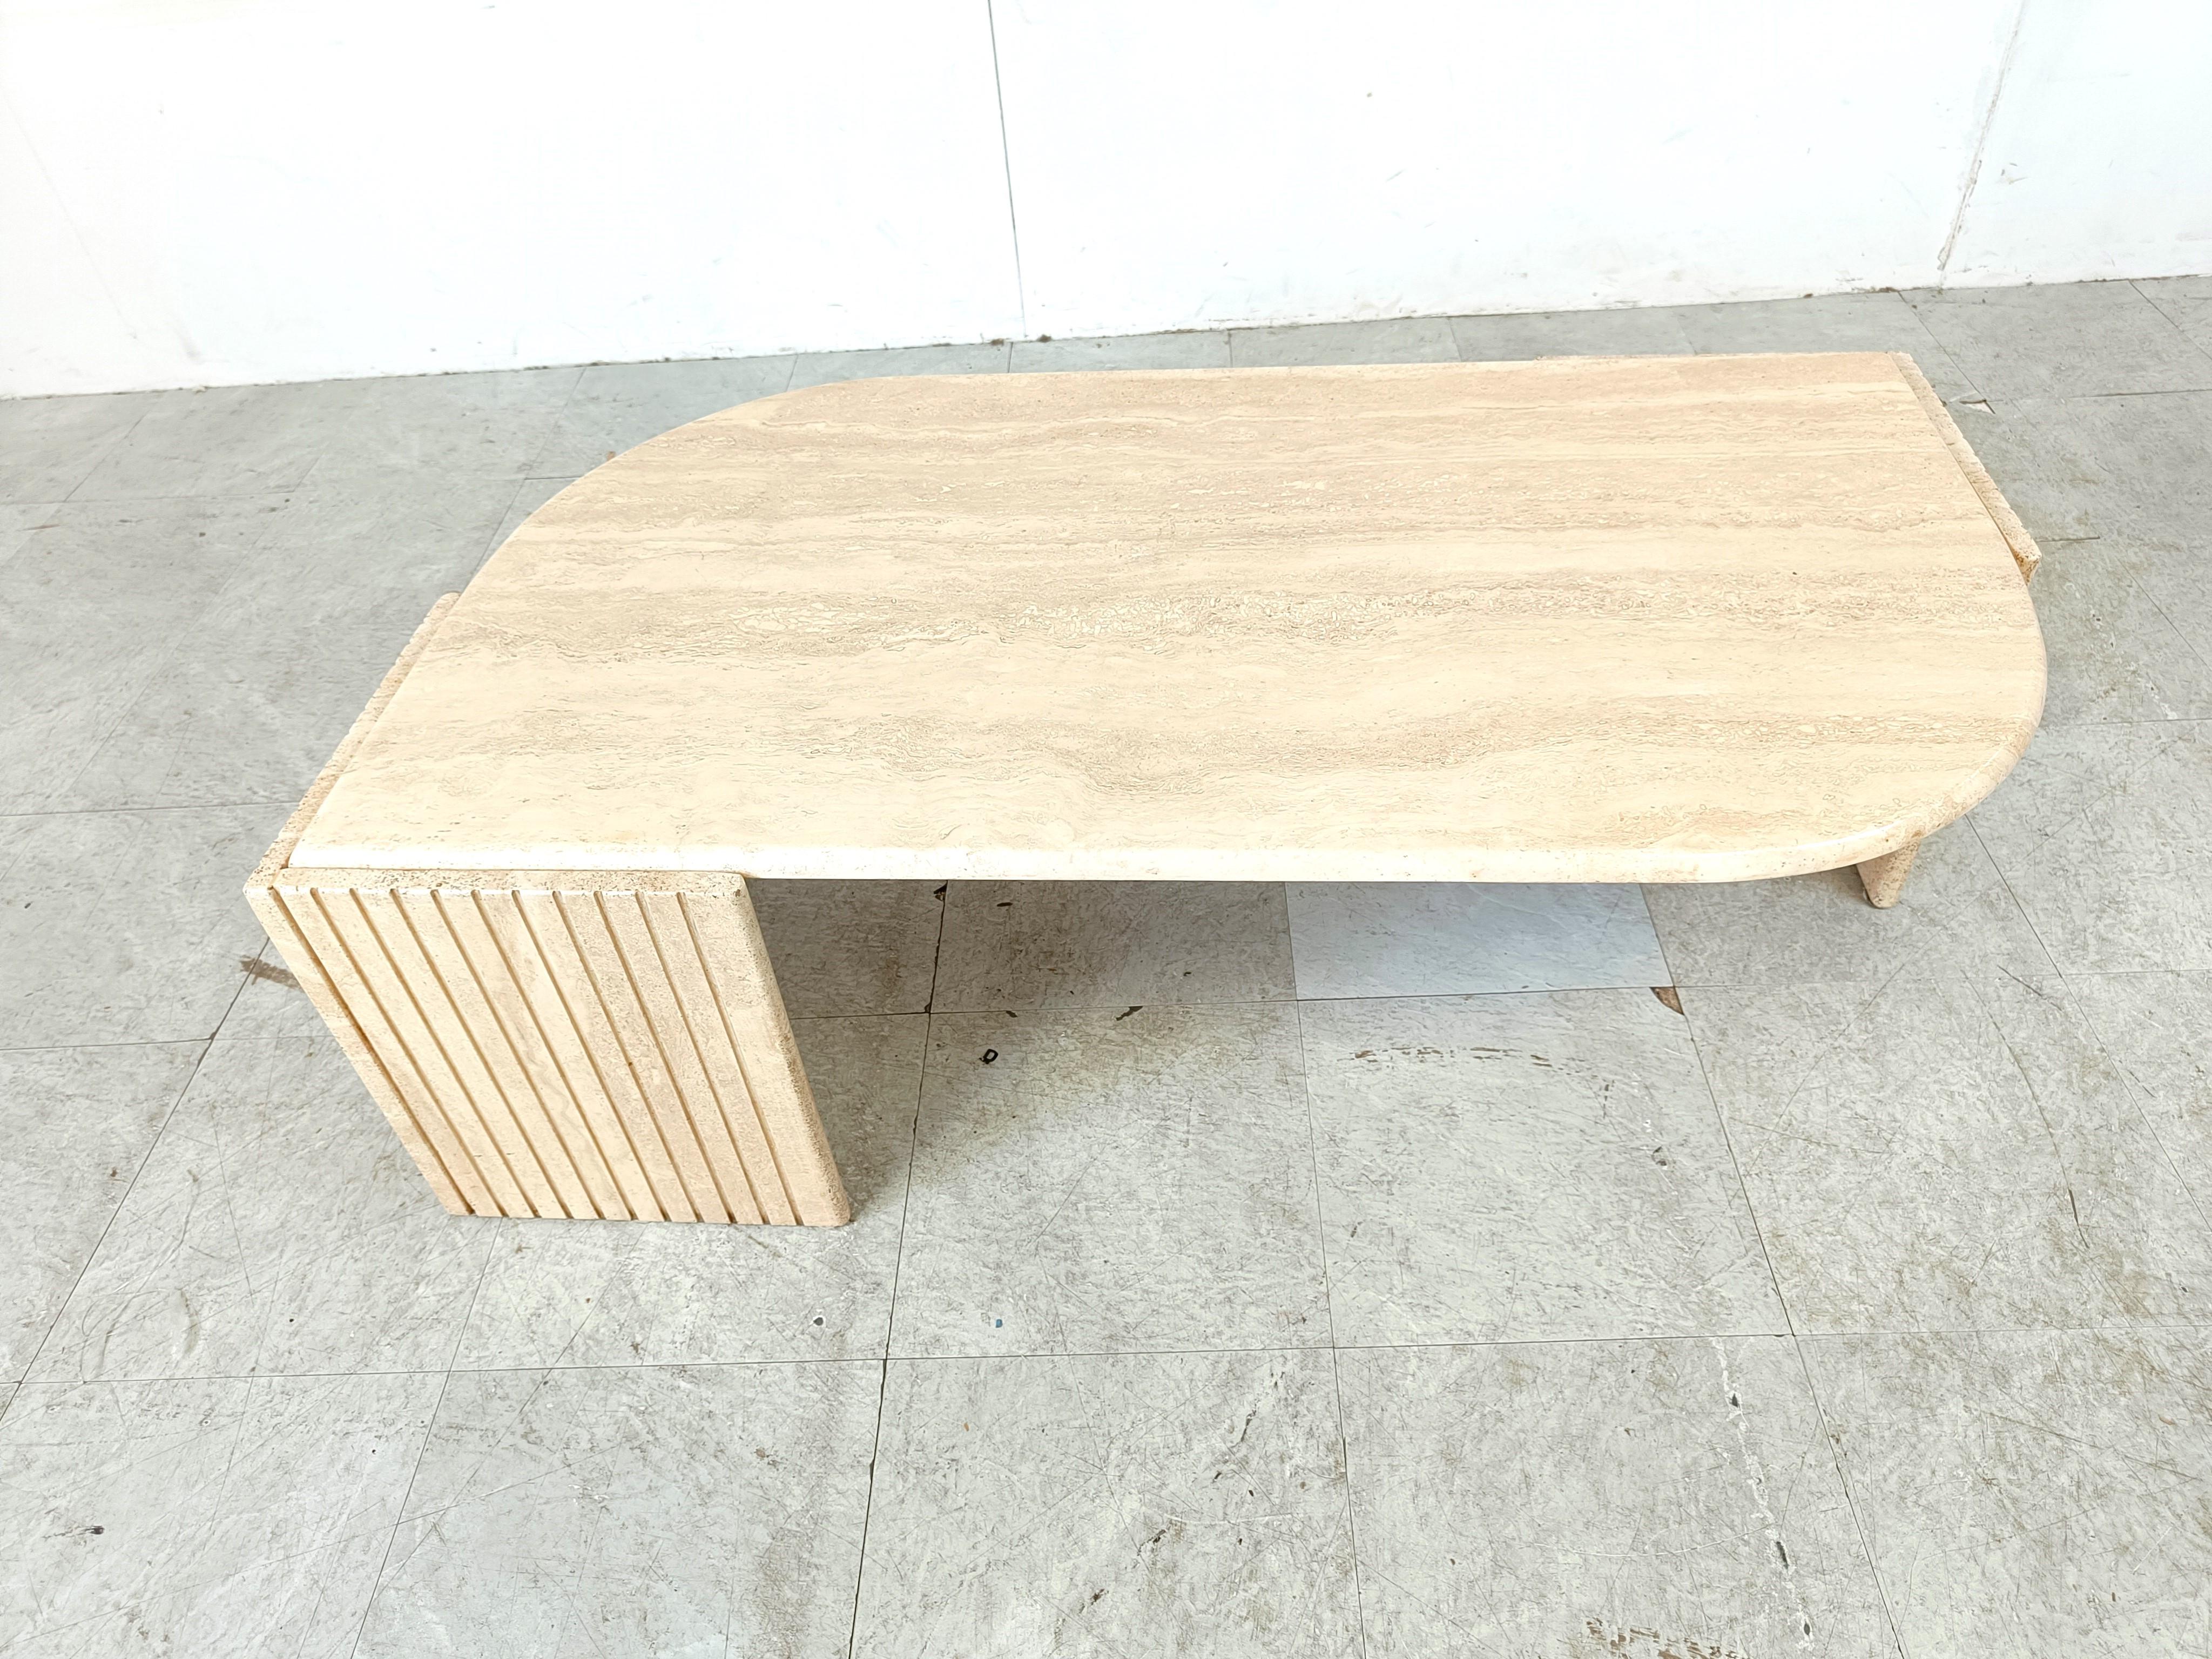 Gorgeous travertine 'eye' shaped coffee table by Roche Bobois.

These tables have been popular thanks to their curved and timeless design.

Good condition

1970s - France

Height: 36cm/14.17